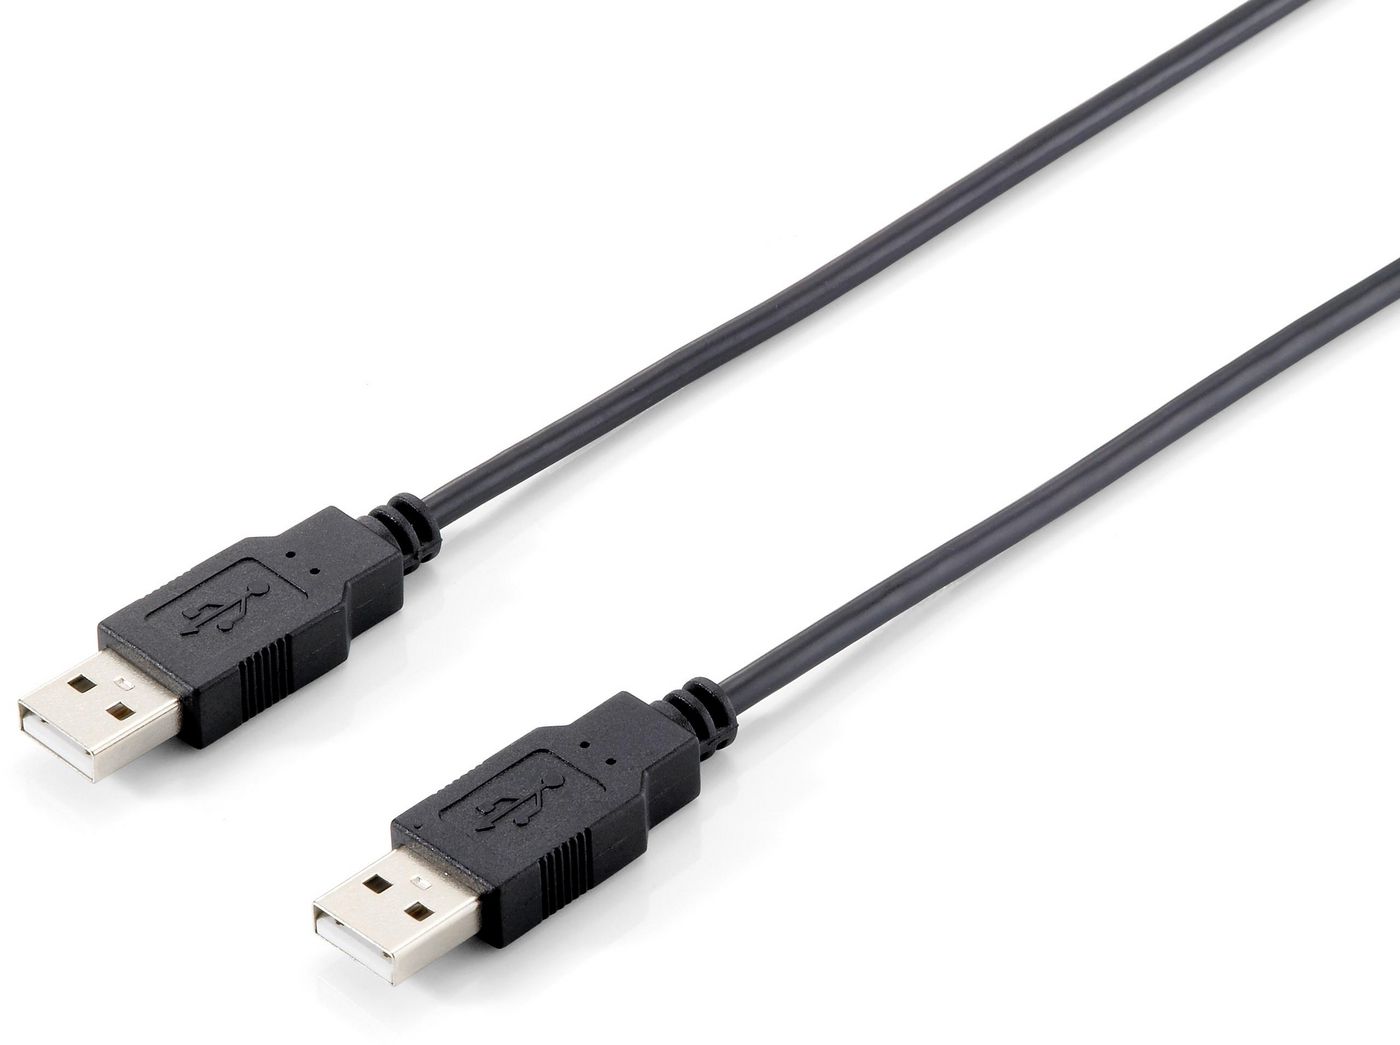 Equip 128872 W128292482 Usb 2.0 Type A Cable, 5.0M , 